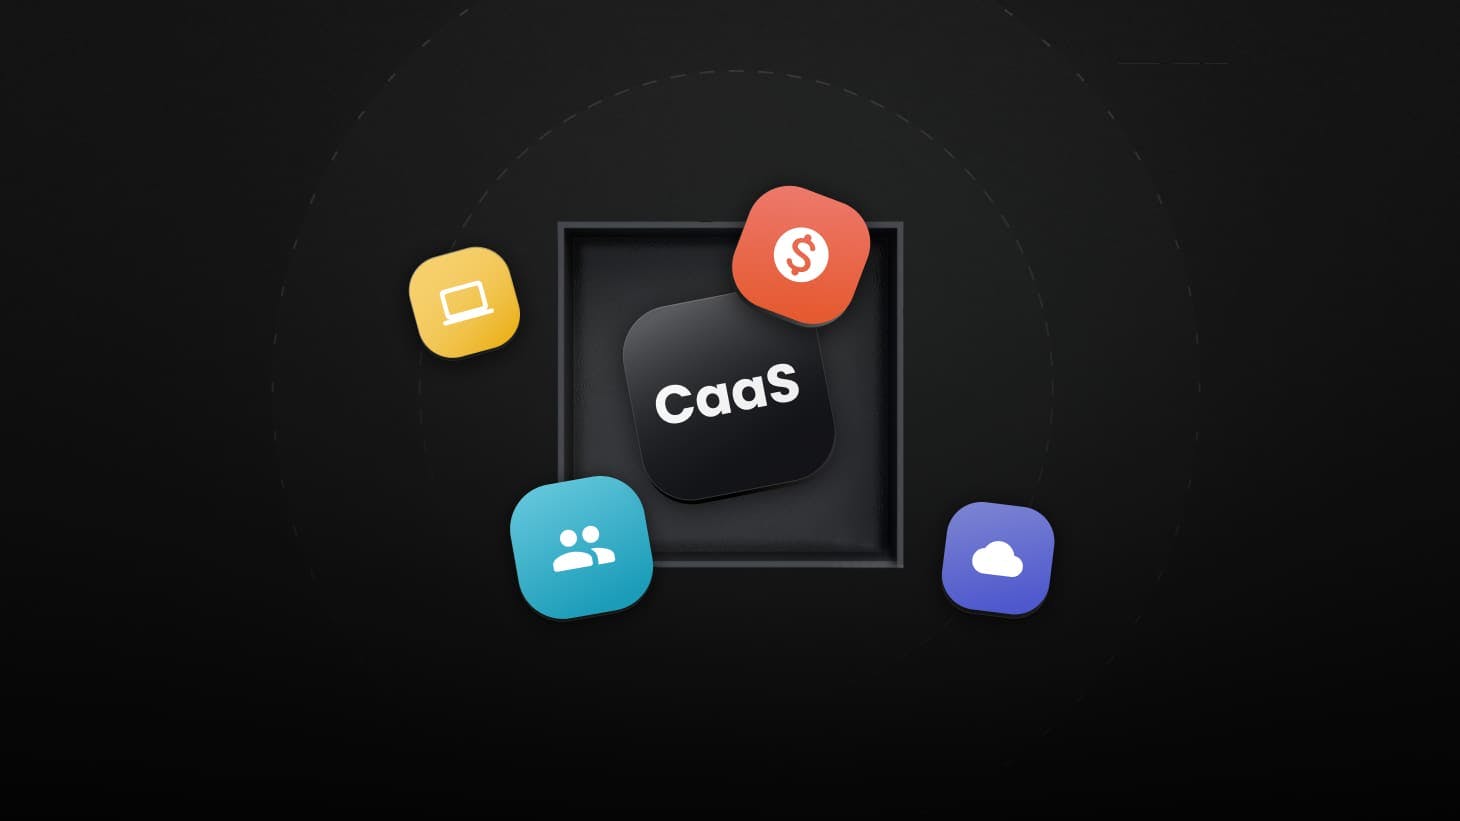 CTO as a Service: What is CaaS? Key benefits and risks